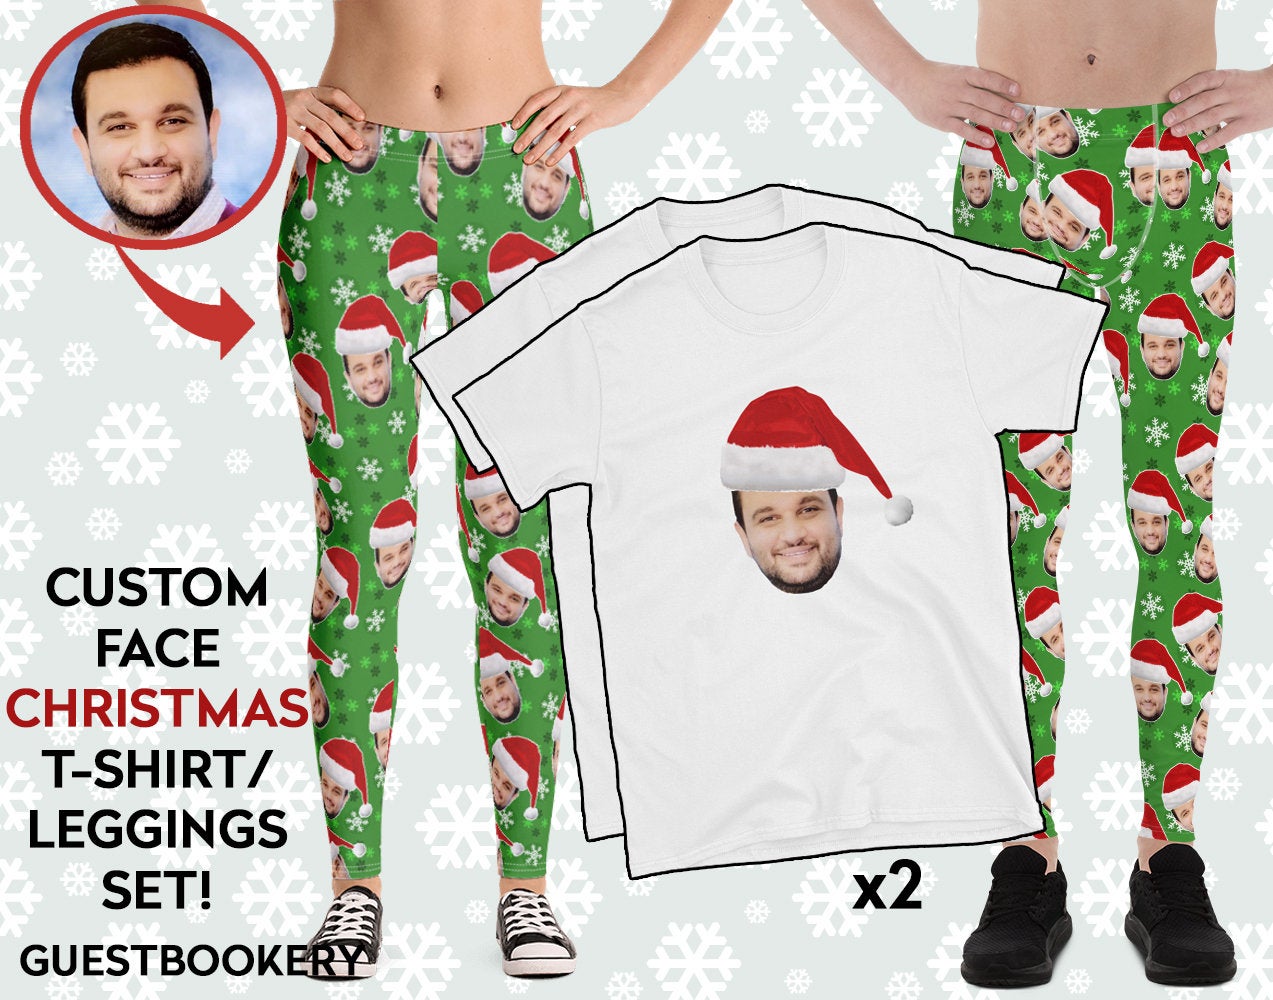 Custom Faces Leggings and Shirt Christmas SET - Male & Female - Guestbookery